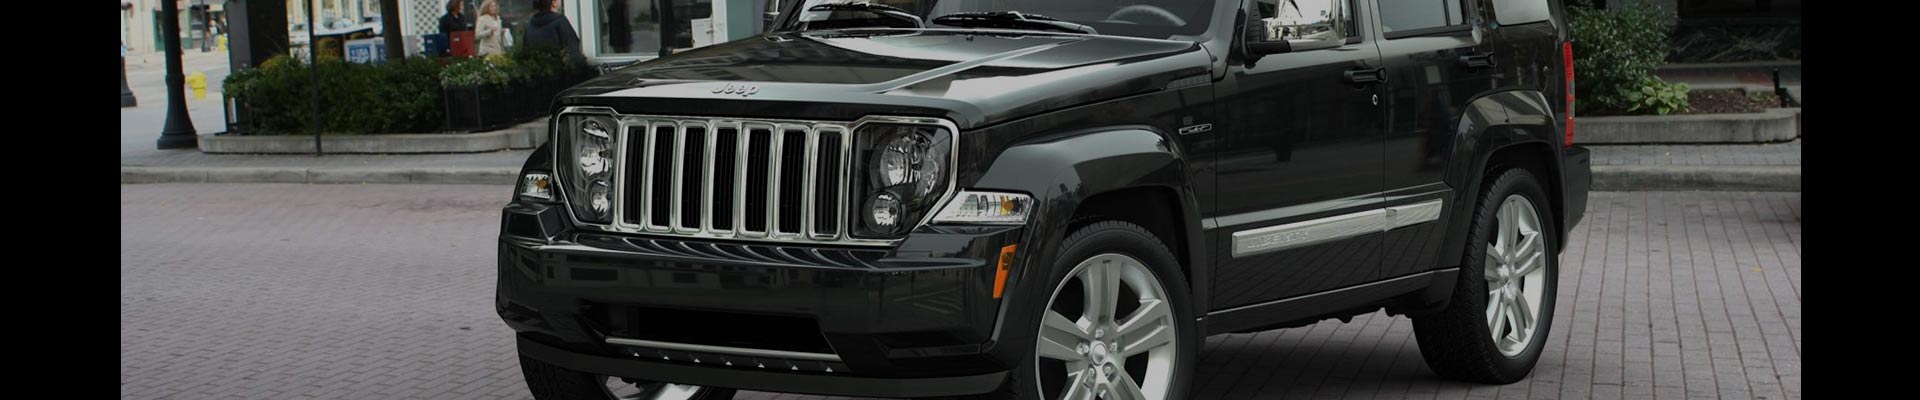 Shop Replacement and OEM 2004 Jeep Liberty Parts with Discounted Price on the Net